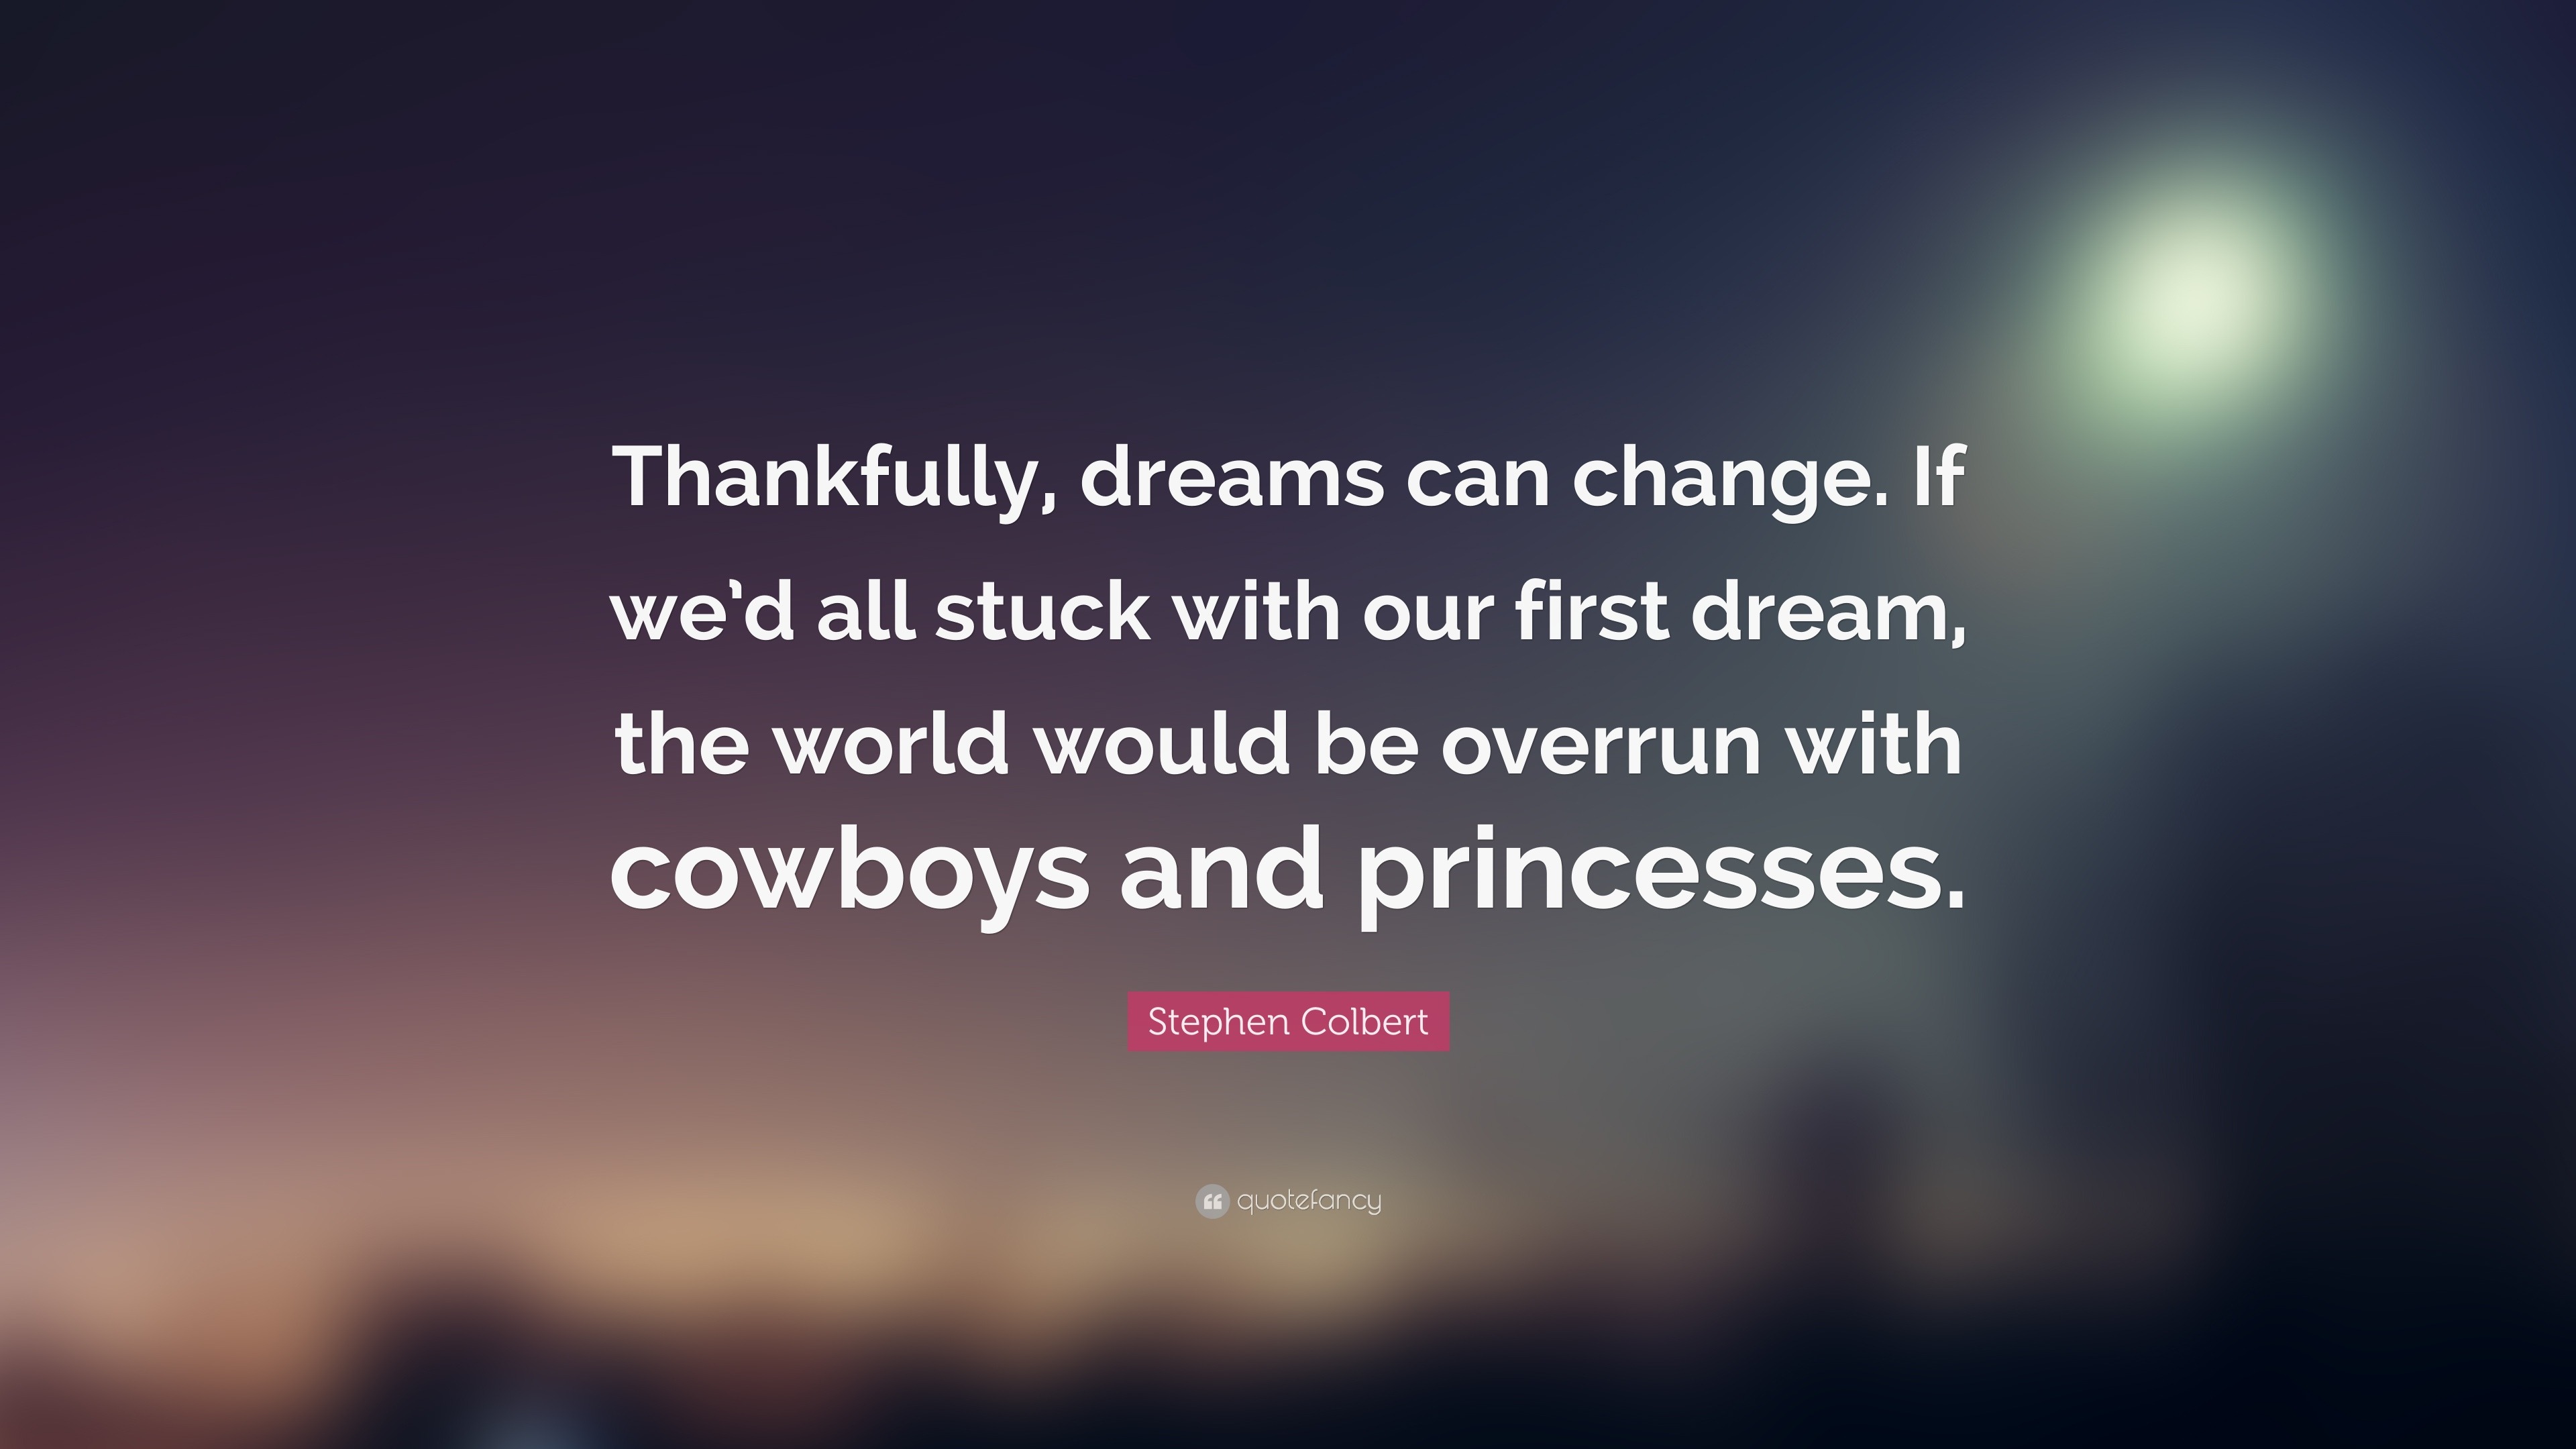 Stephen Colbert Quote Thankfully Dreams Can Change If We D All Stuck With Our First Dream The World Would Be Overrun With Cowboys And Princ 7 Wallpapers Quotefancy